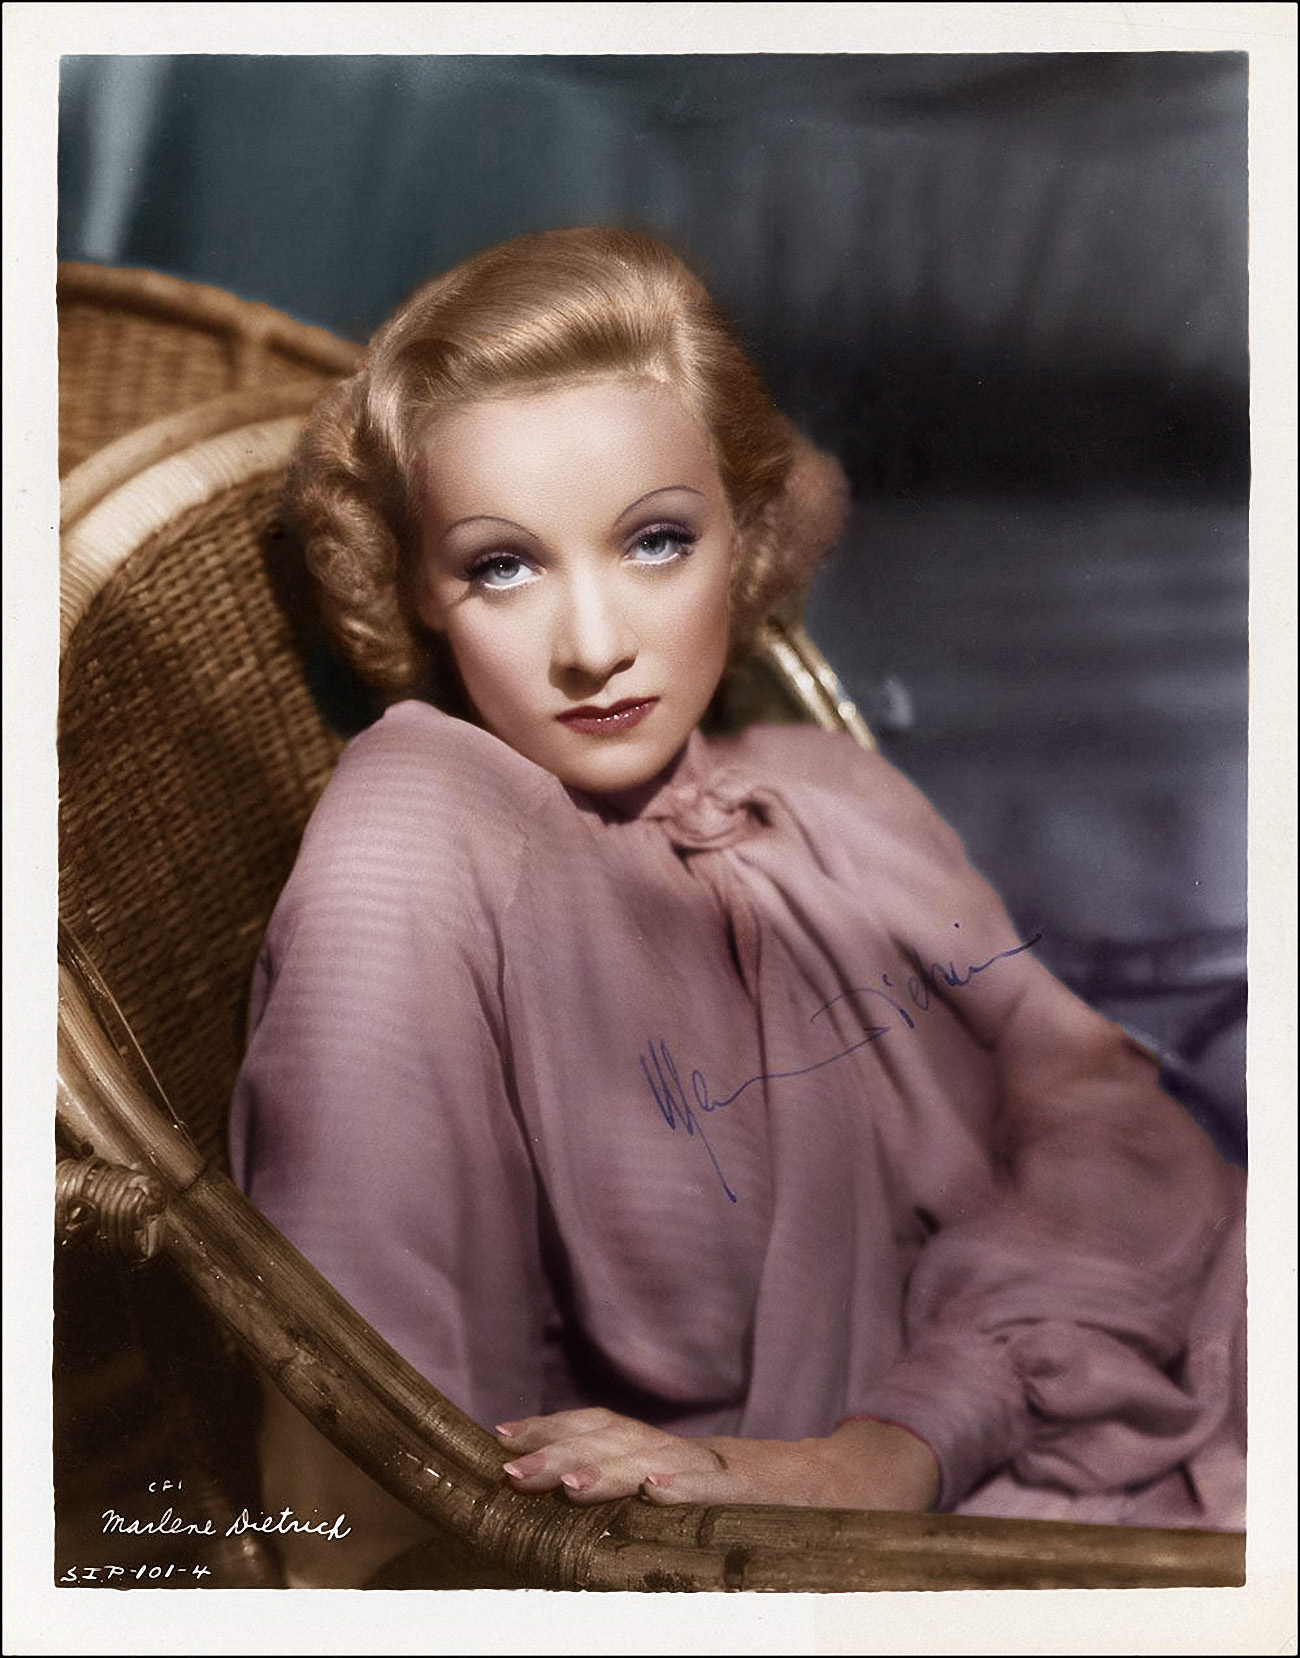 Marlene Dietrich Image HD Wallpaper And